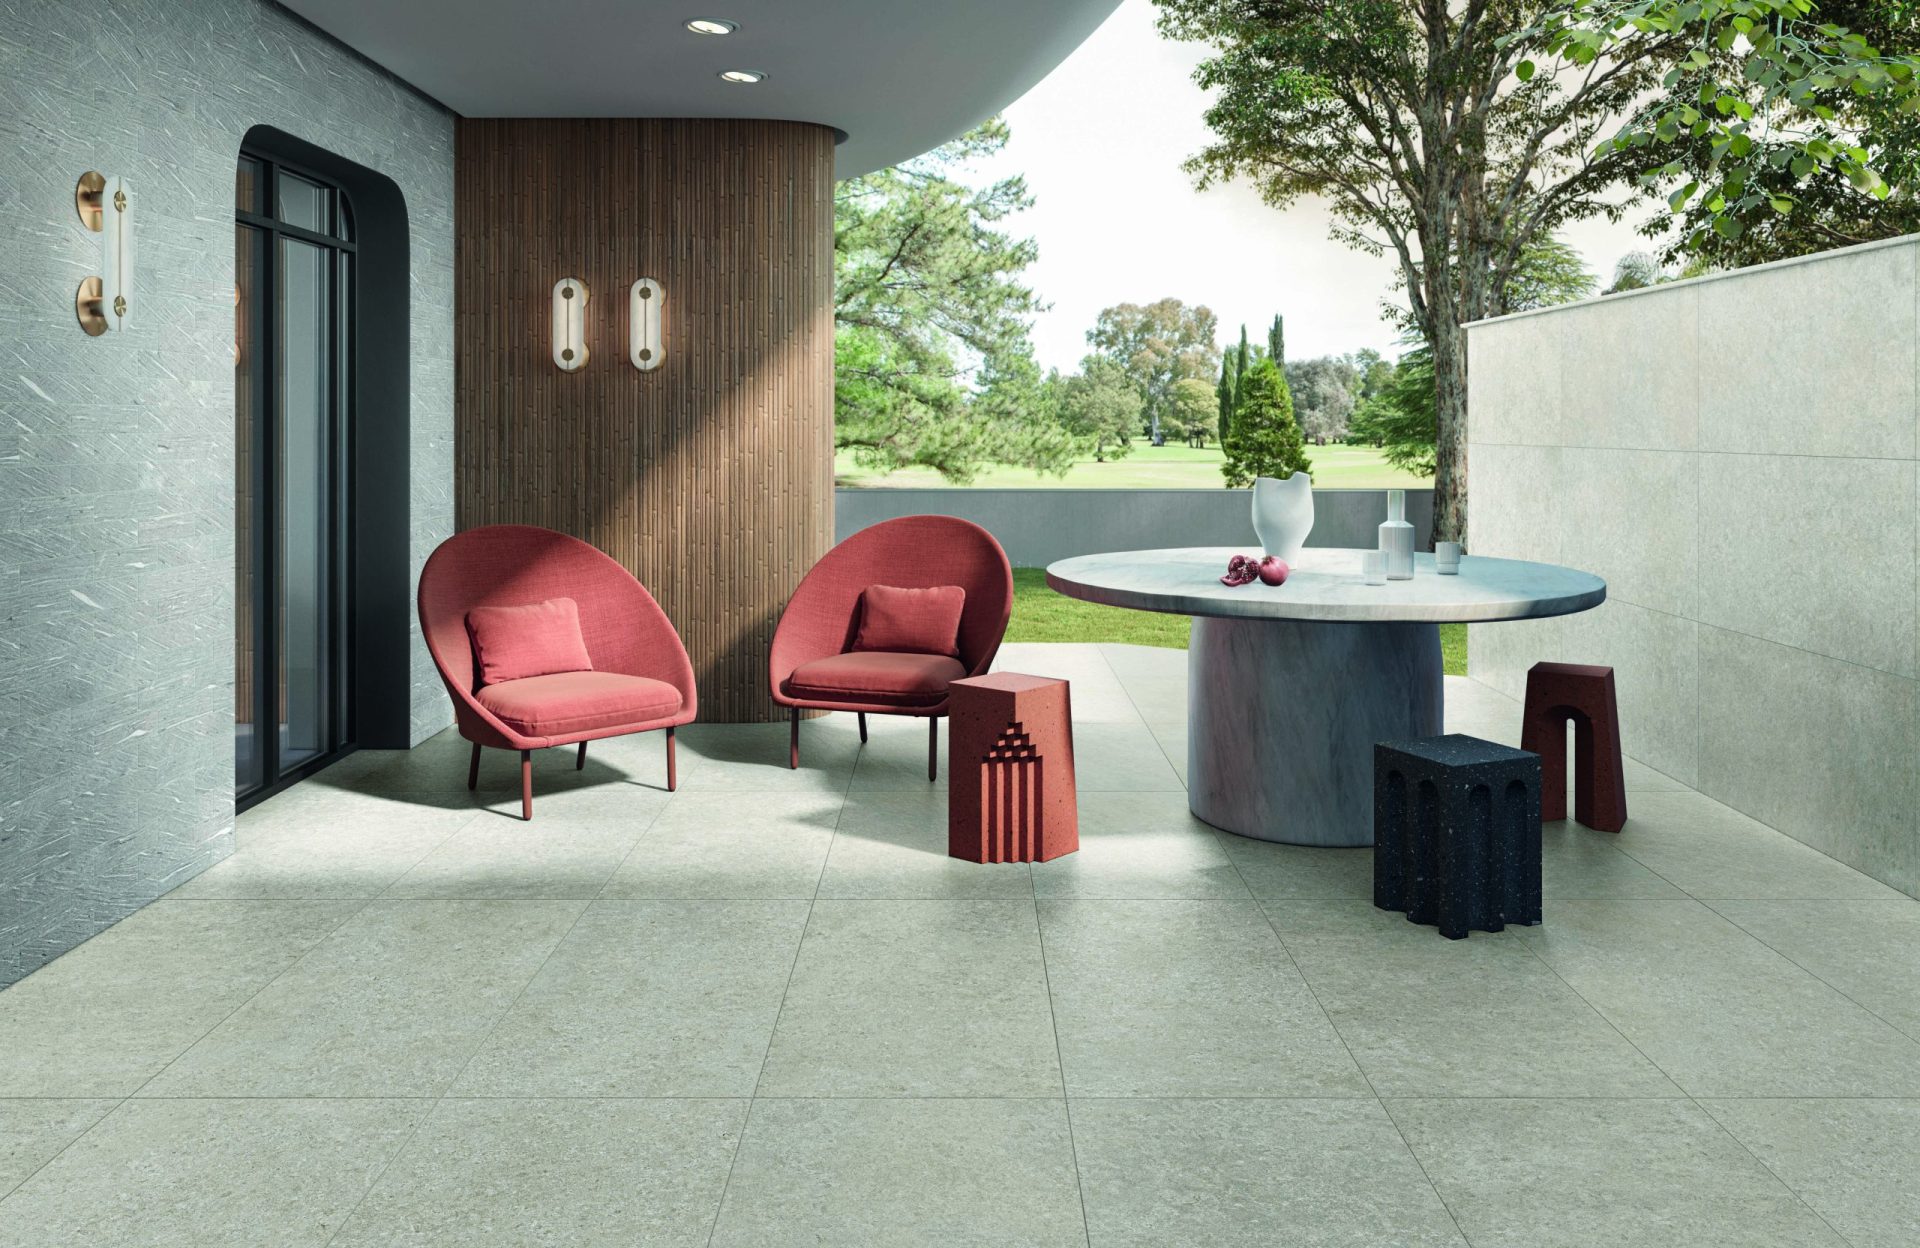 Outdoor seating area showing Tide Road porcelain tile in Platinum Vein cut on the wall and Light Cross cut on the floor.